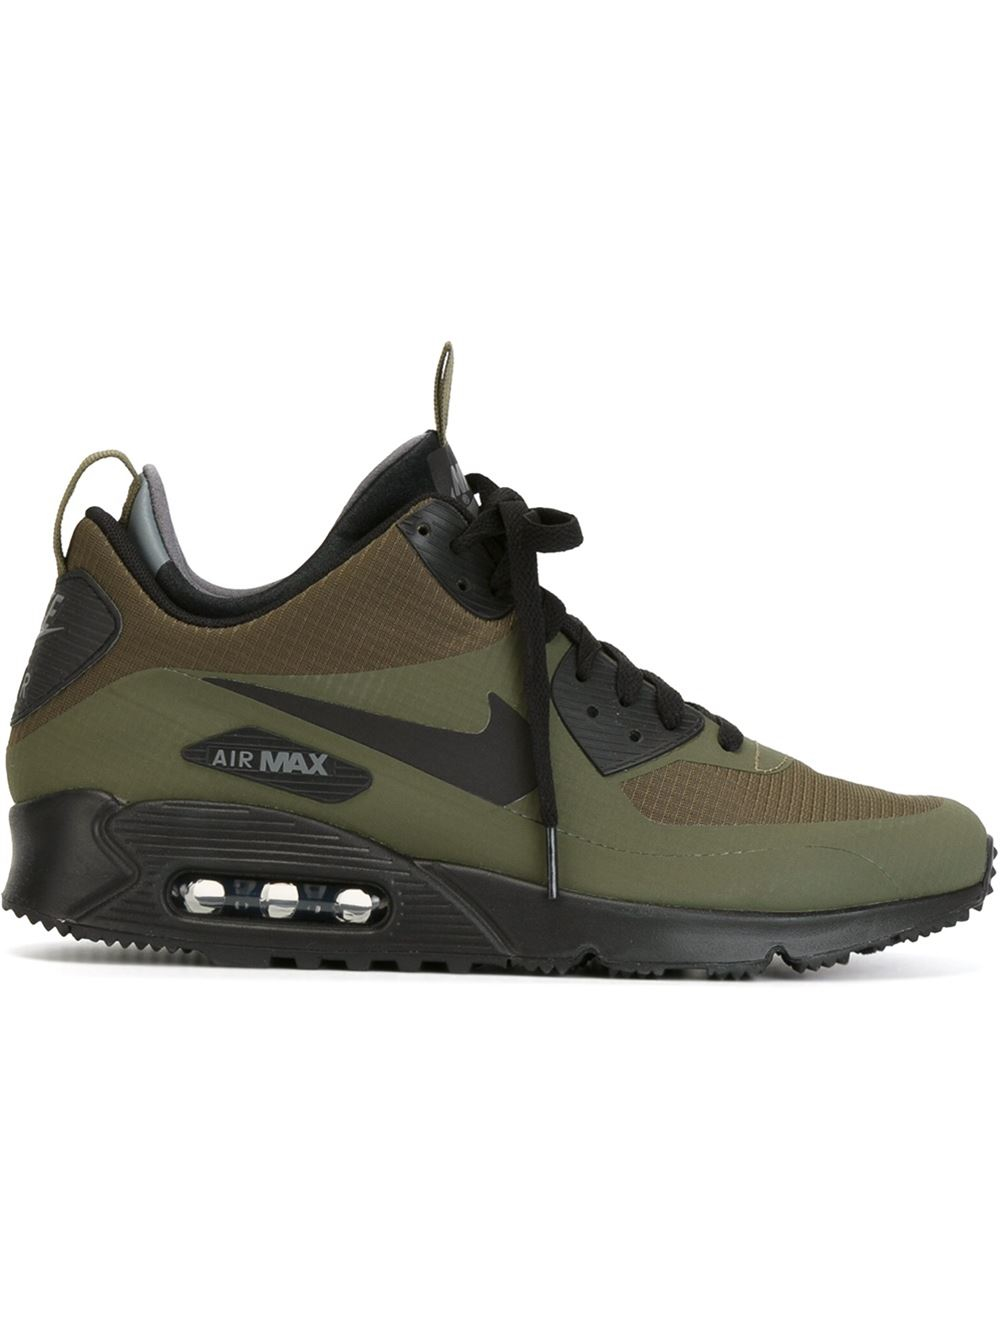 air max sneakers boots